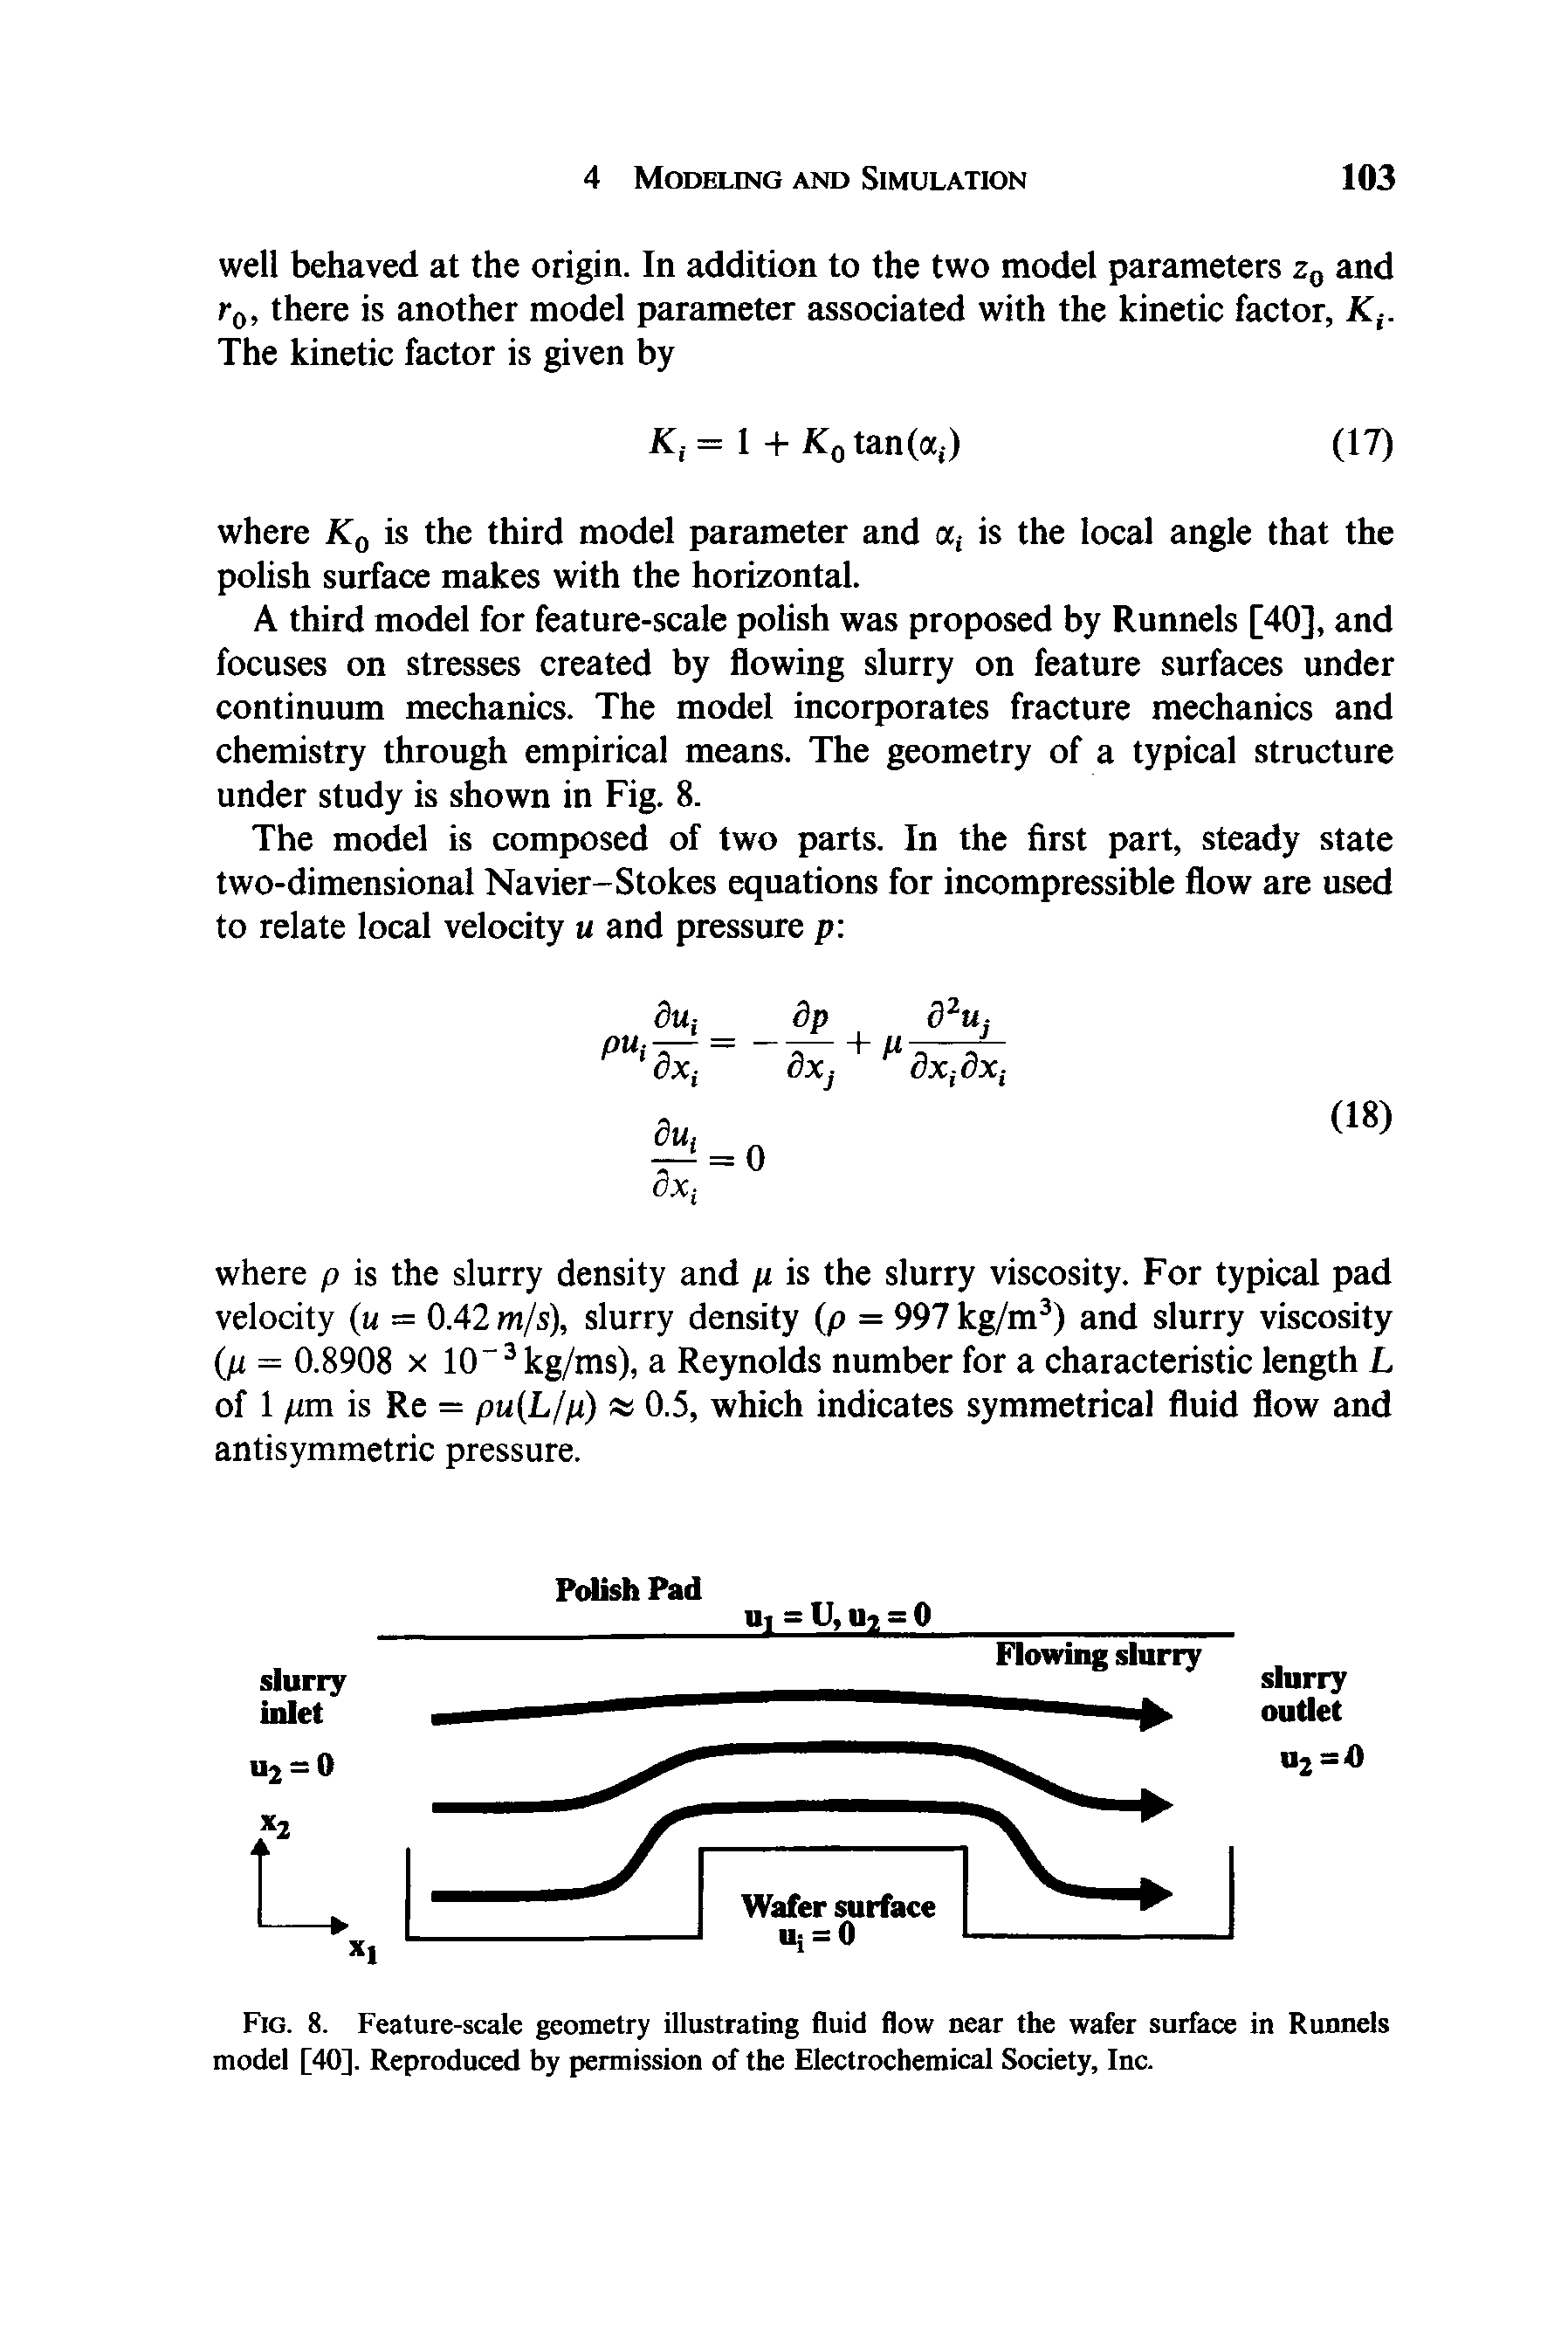 Fig. 8. Feature-scale geometry illustrating fluid flow near the wafer surface in Runnels model [40]. Reproduced by permission of the Electrochemical Society, Inc.